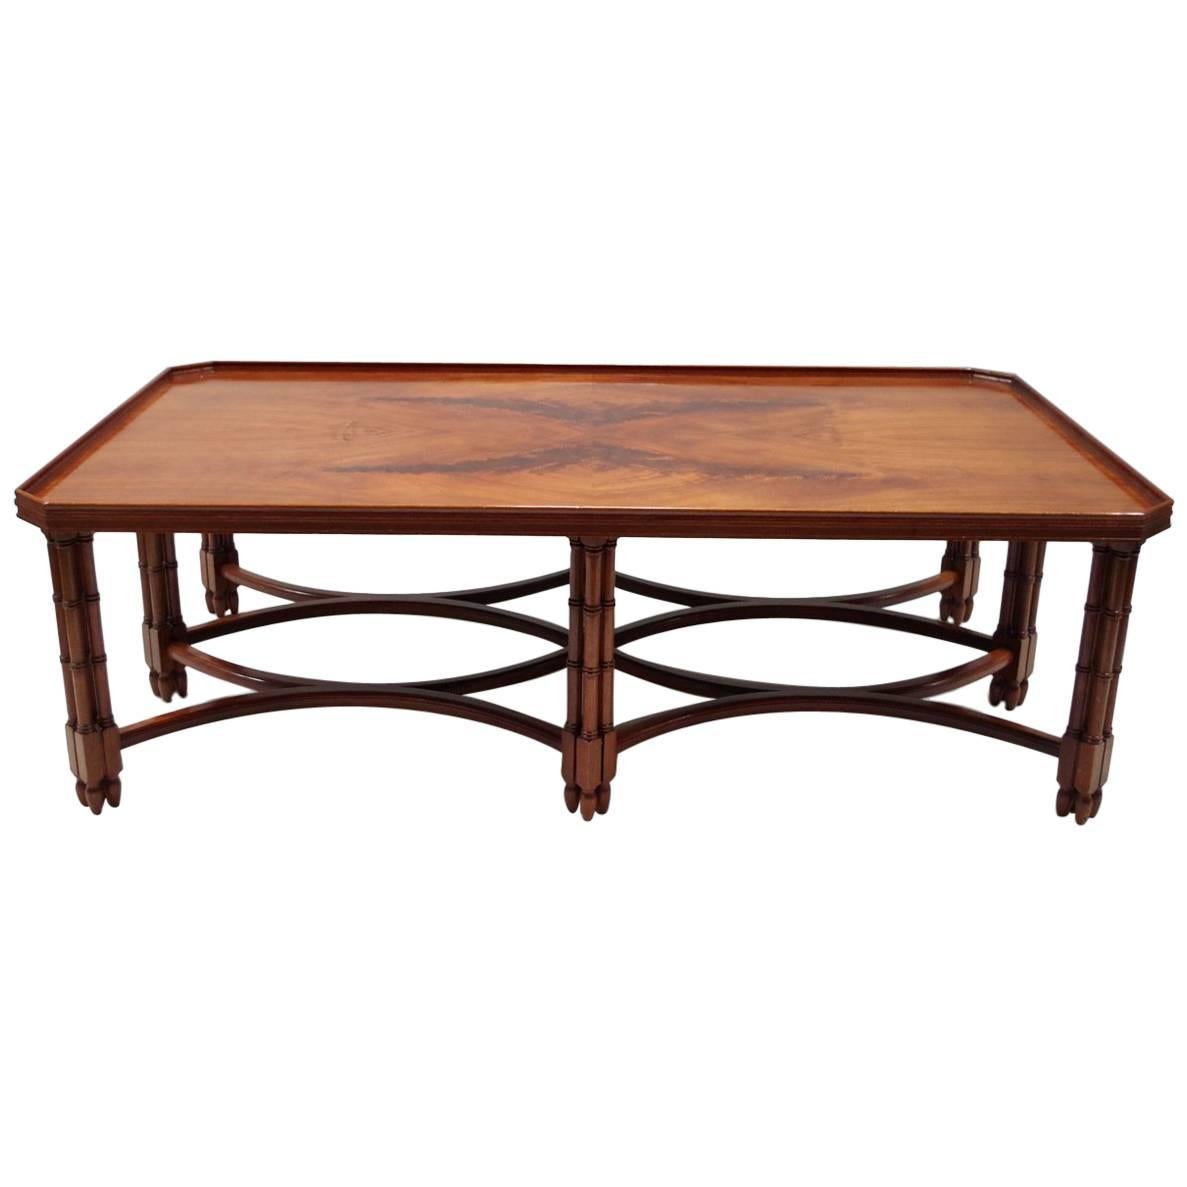 Large English Style Mahogany Coffee Table with Bambou Style Legs, 1980 Period